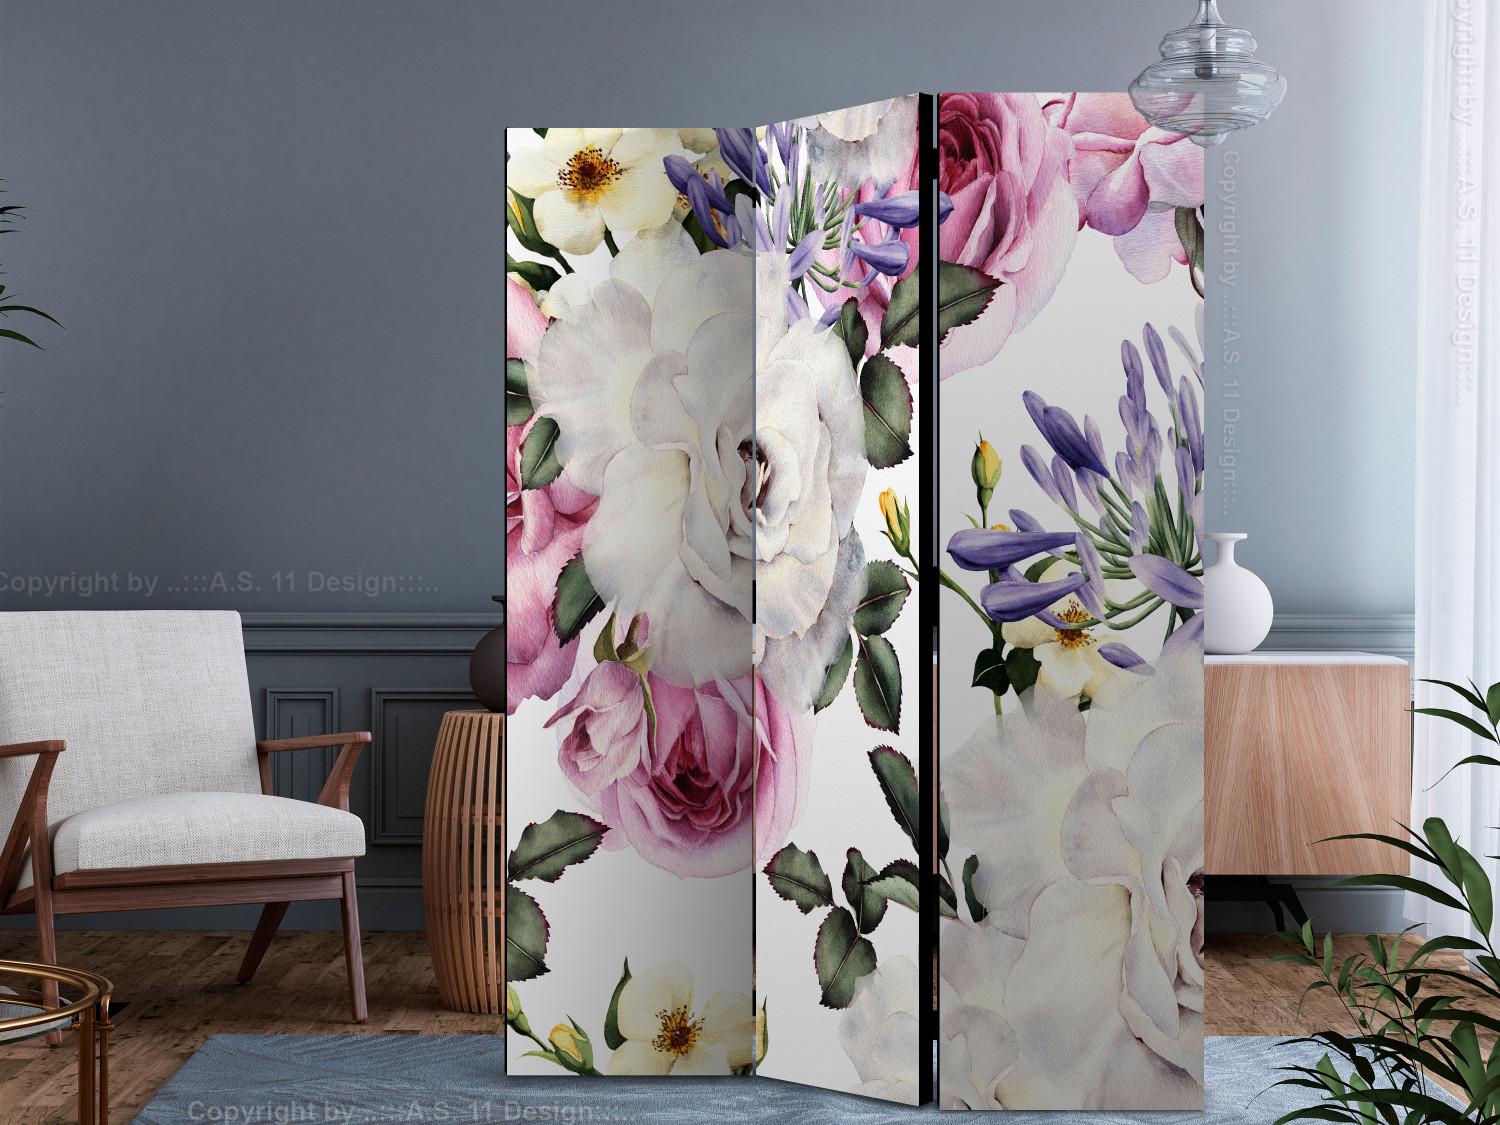 Biombo Floral Glade [Room Dividers]